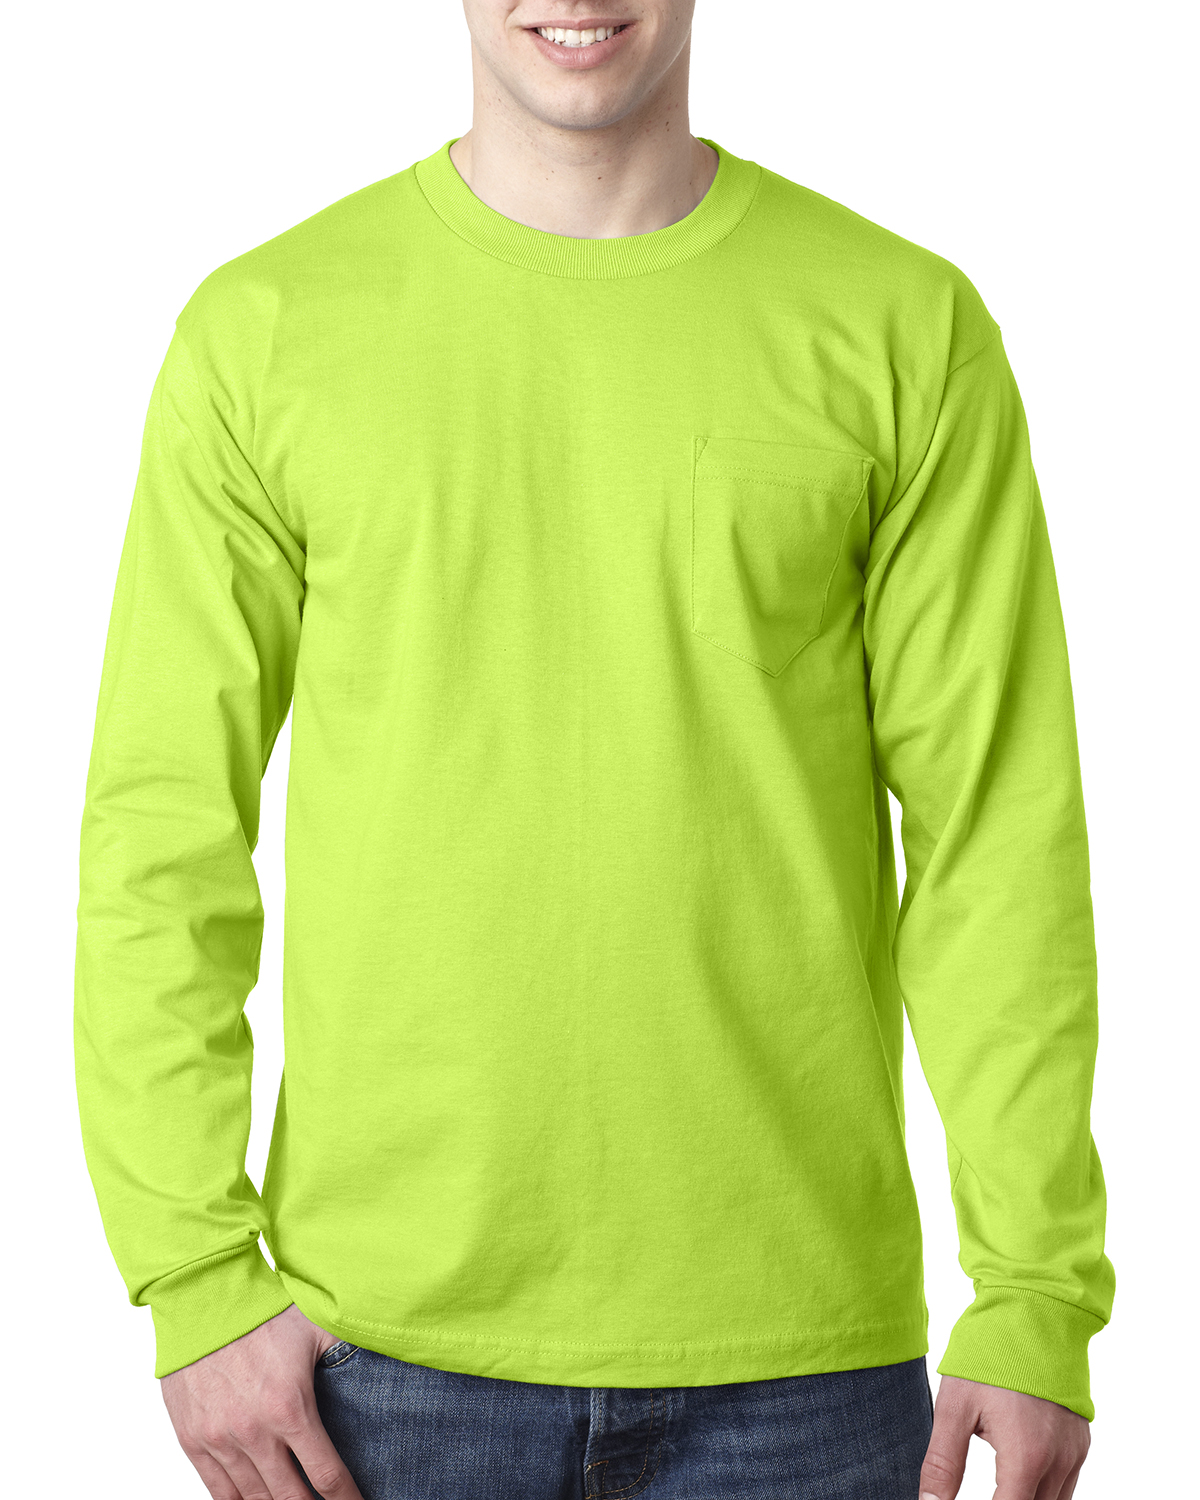 XL/Lime Green Bayside Apparel USA-Made 50/50 Long Sleeve T-Shirt with a Pocket 